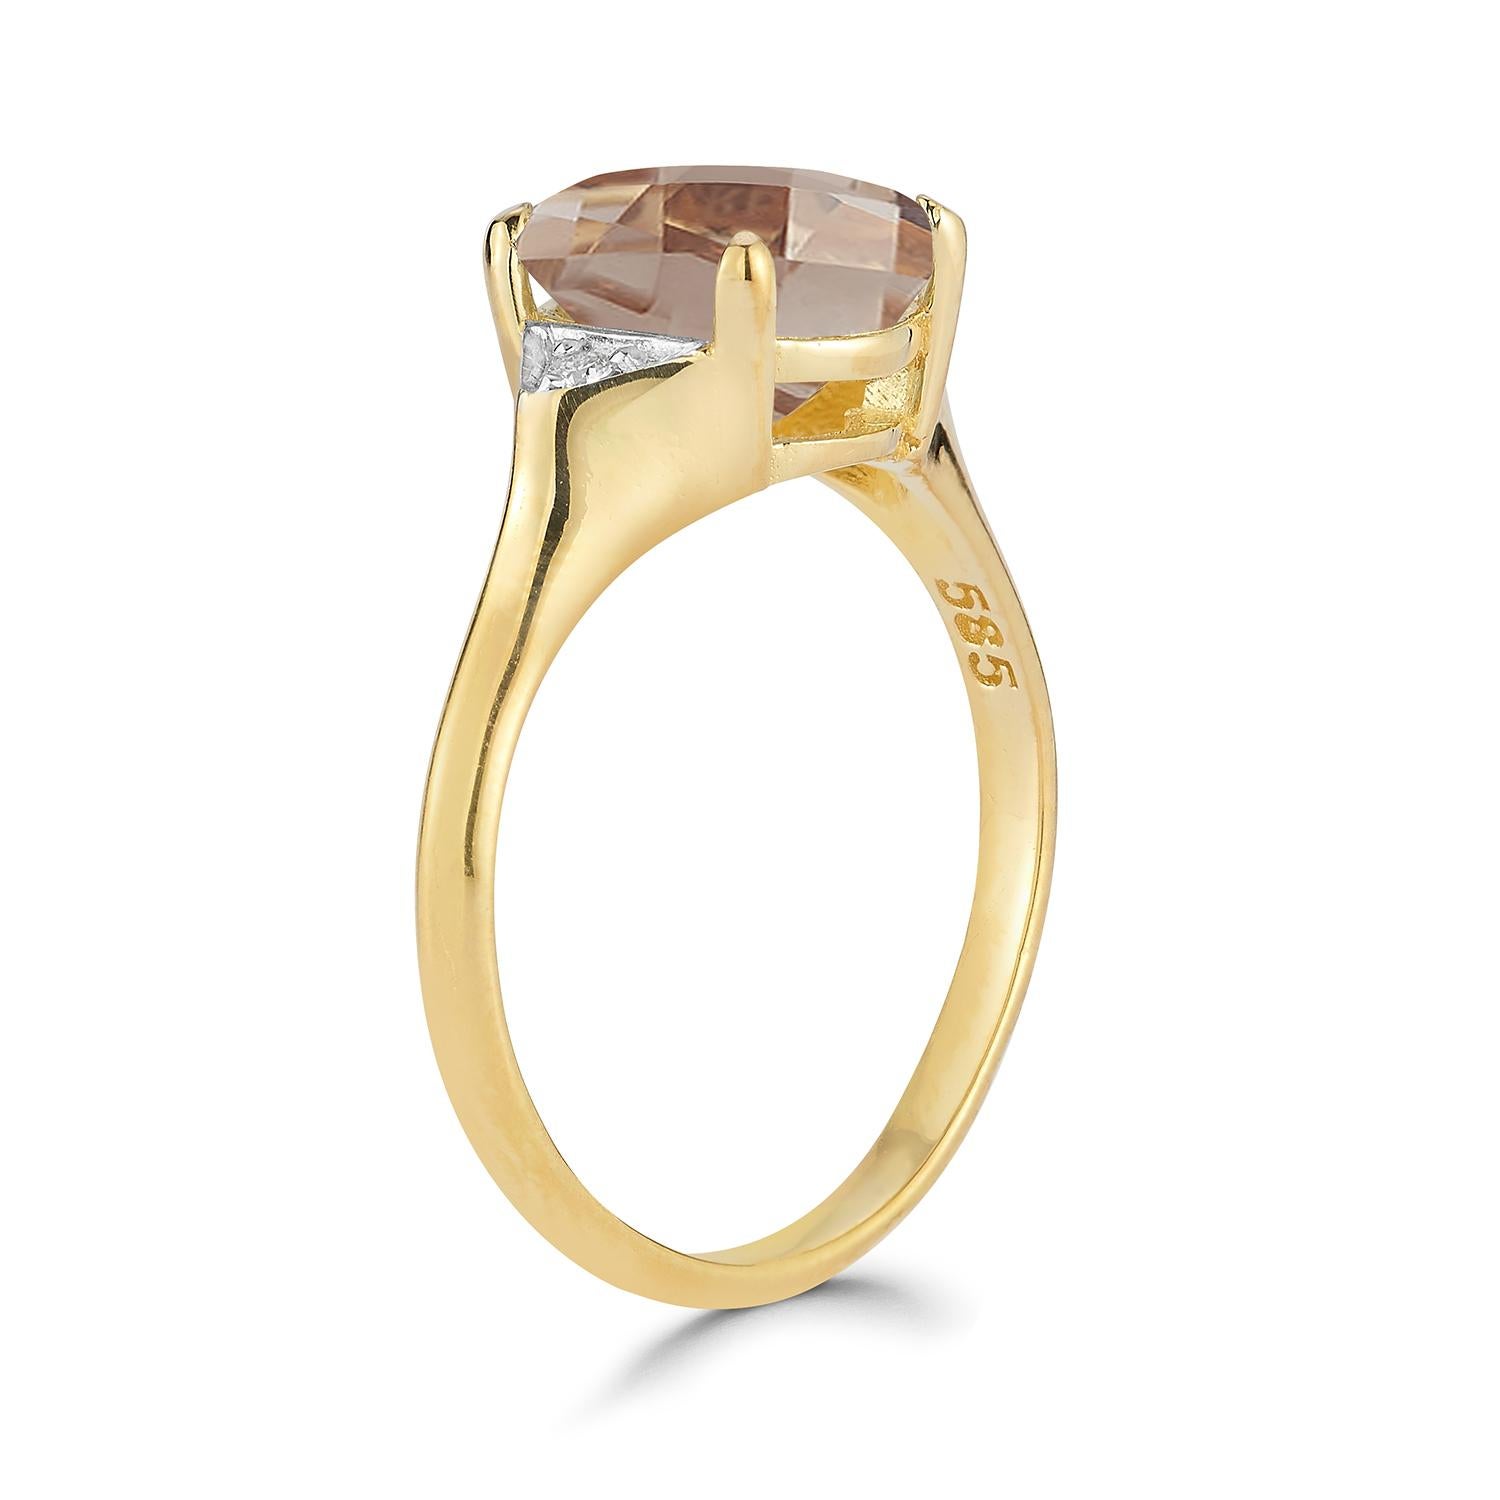 For Sale:  Hand-Crafted 14K Gold 0.05 ct. tw. Diamond & 4.75CT Smokey Topaz Cocktail Ring 3